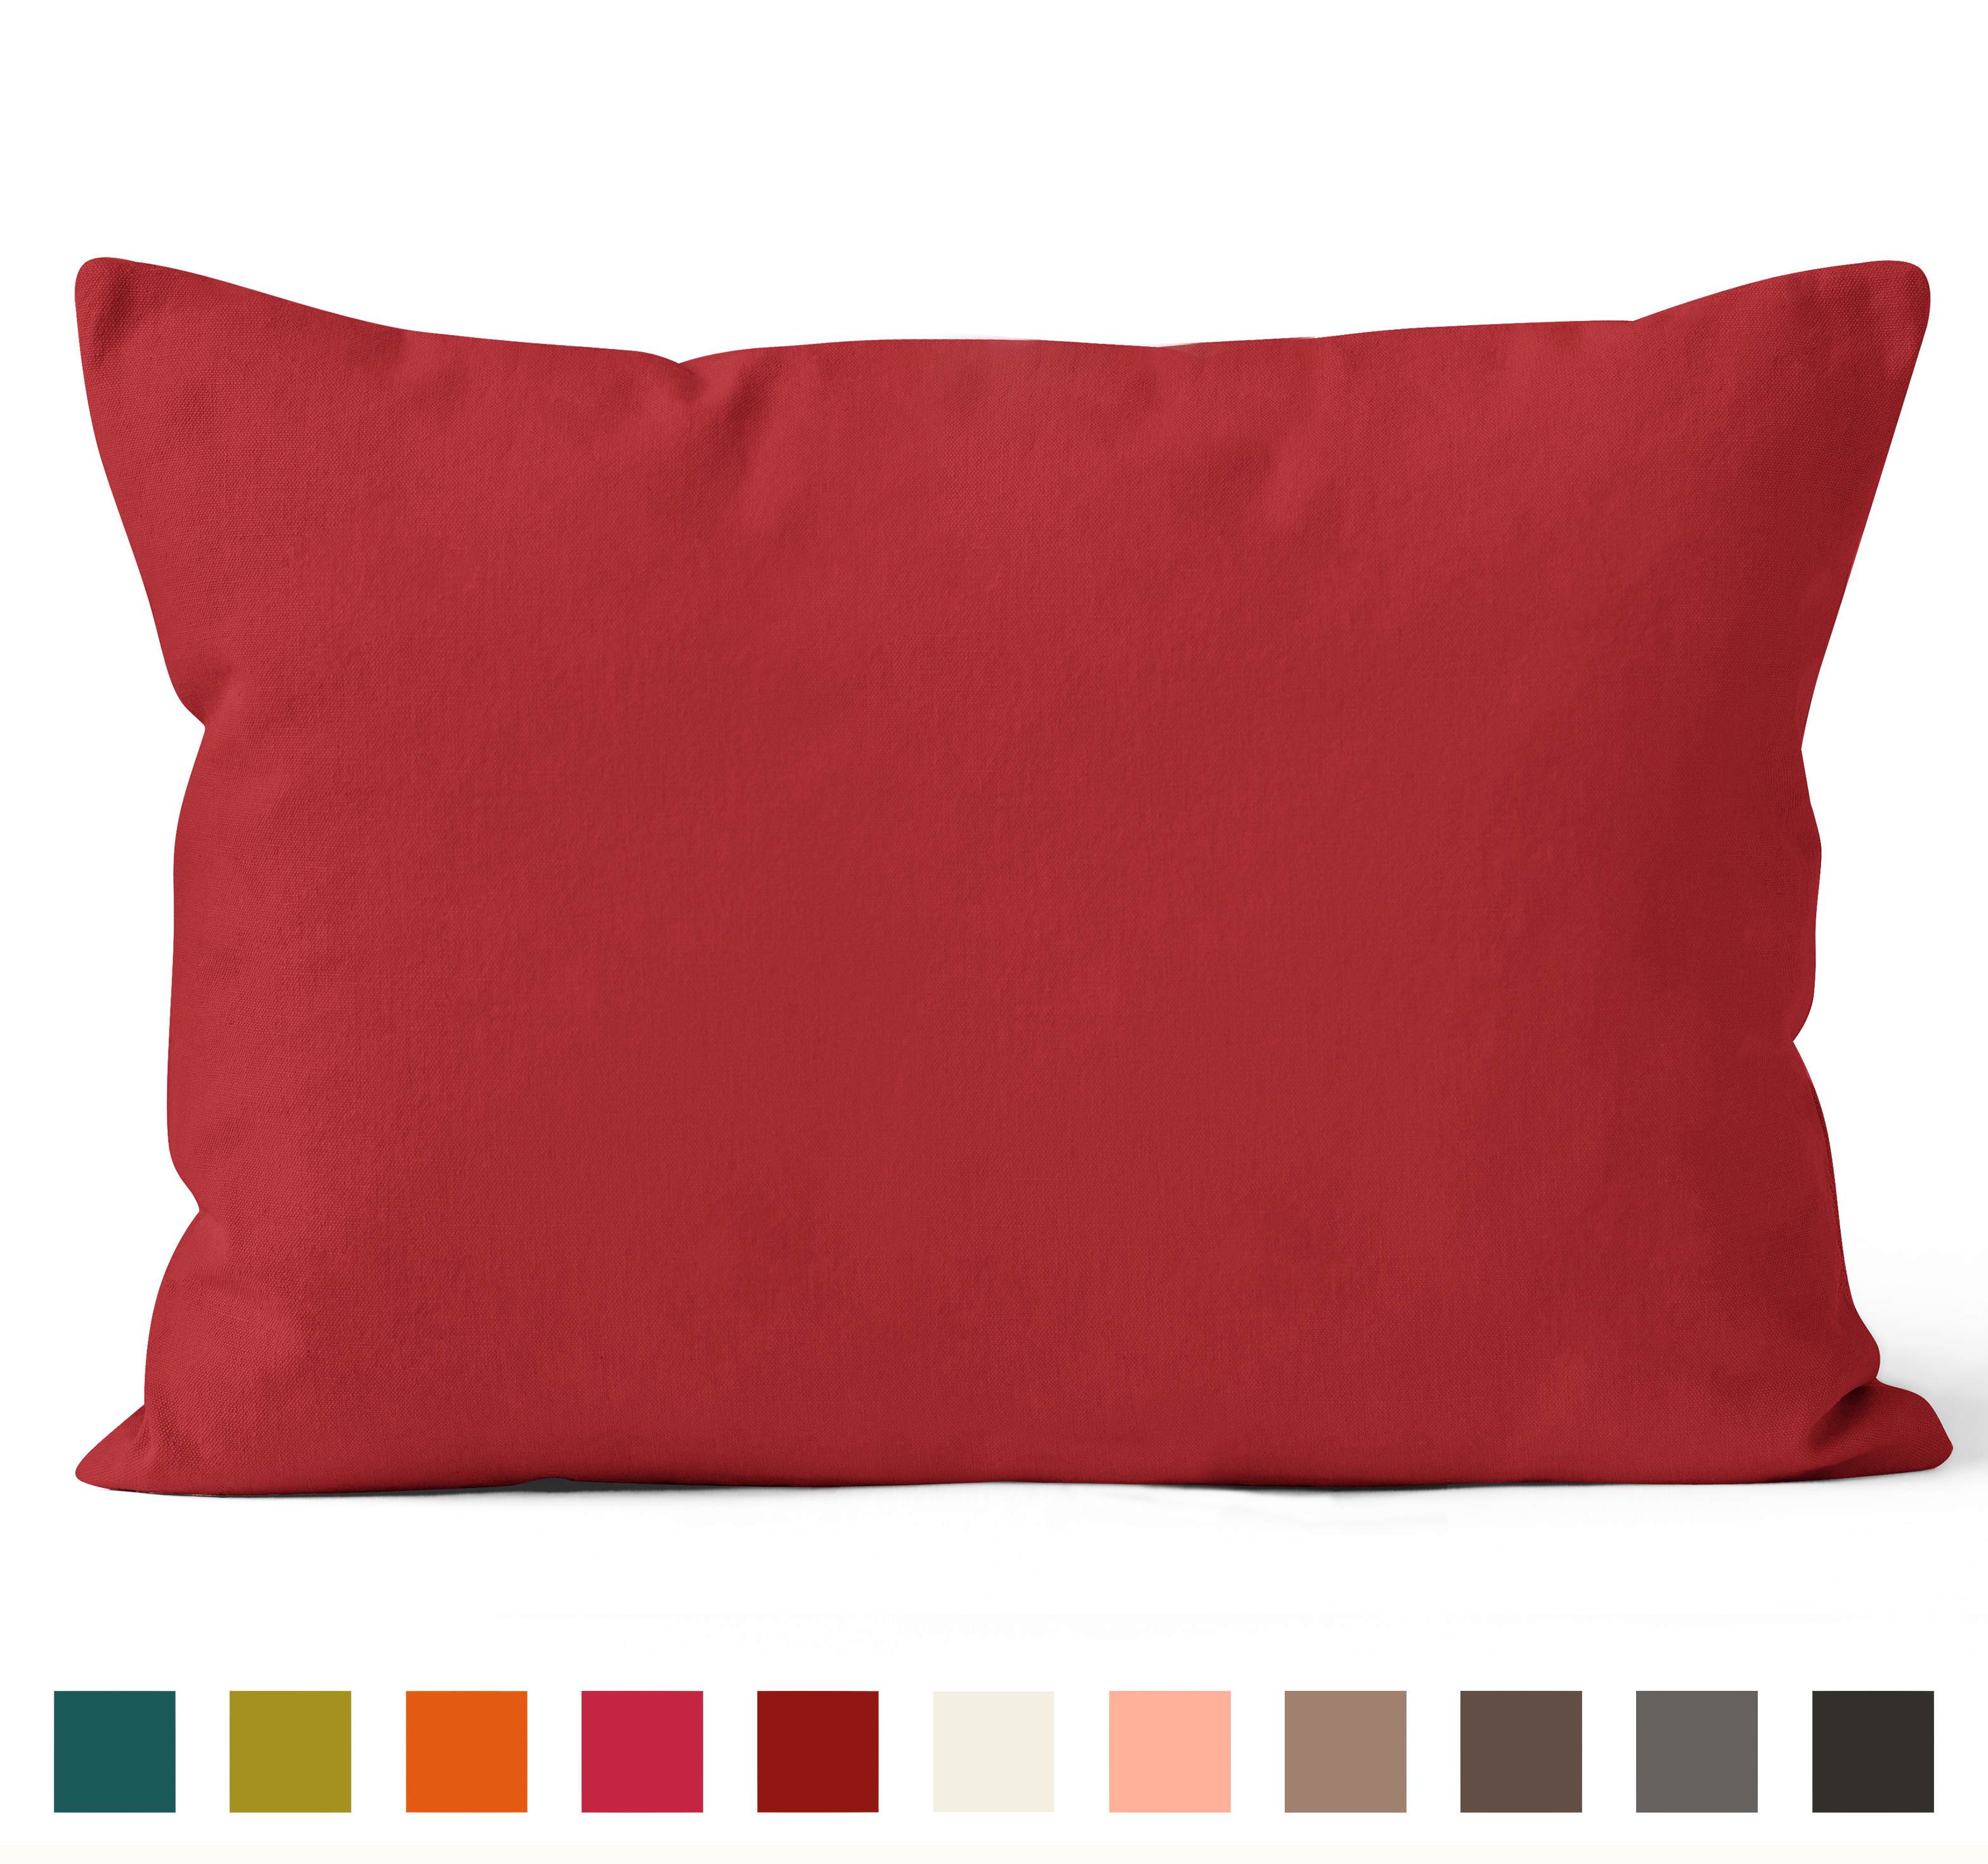 Encasa Homes Dyed Cotton Canvas Cushion Cover (Choose with or without fillers) - 30x50 cm, Deep Red